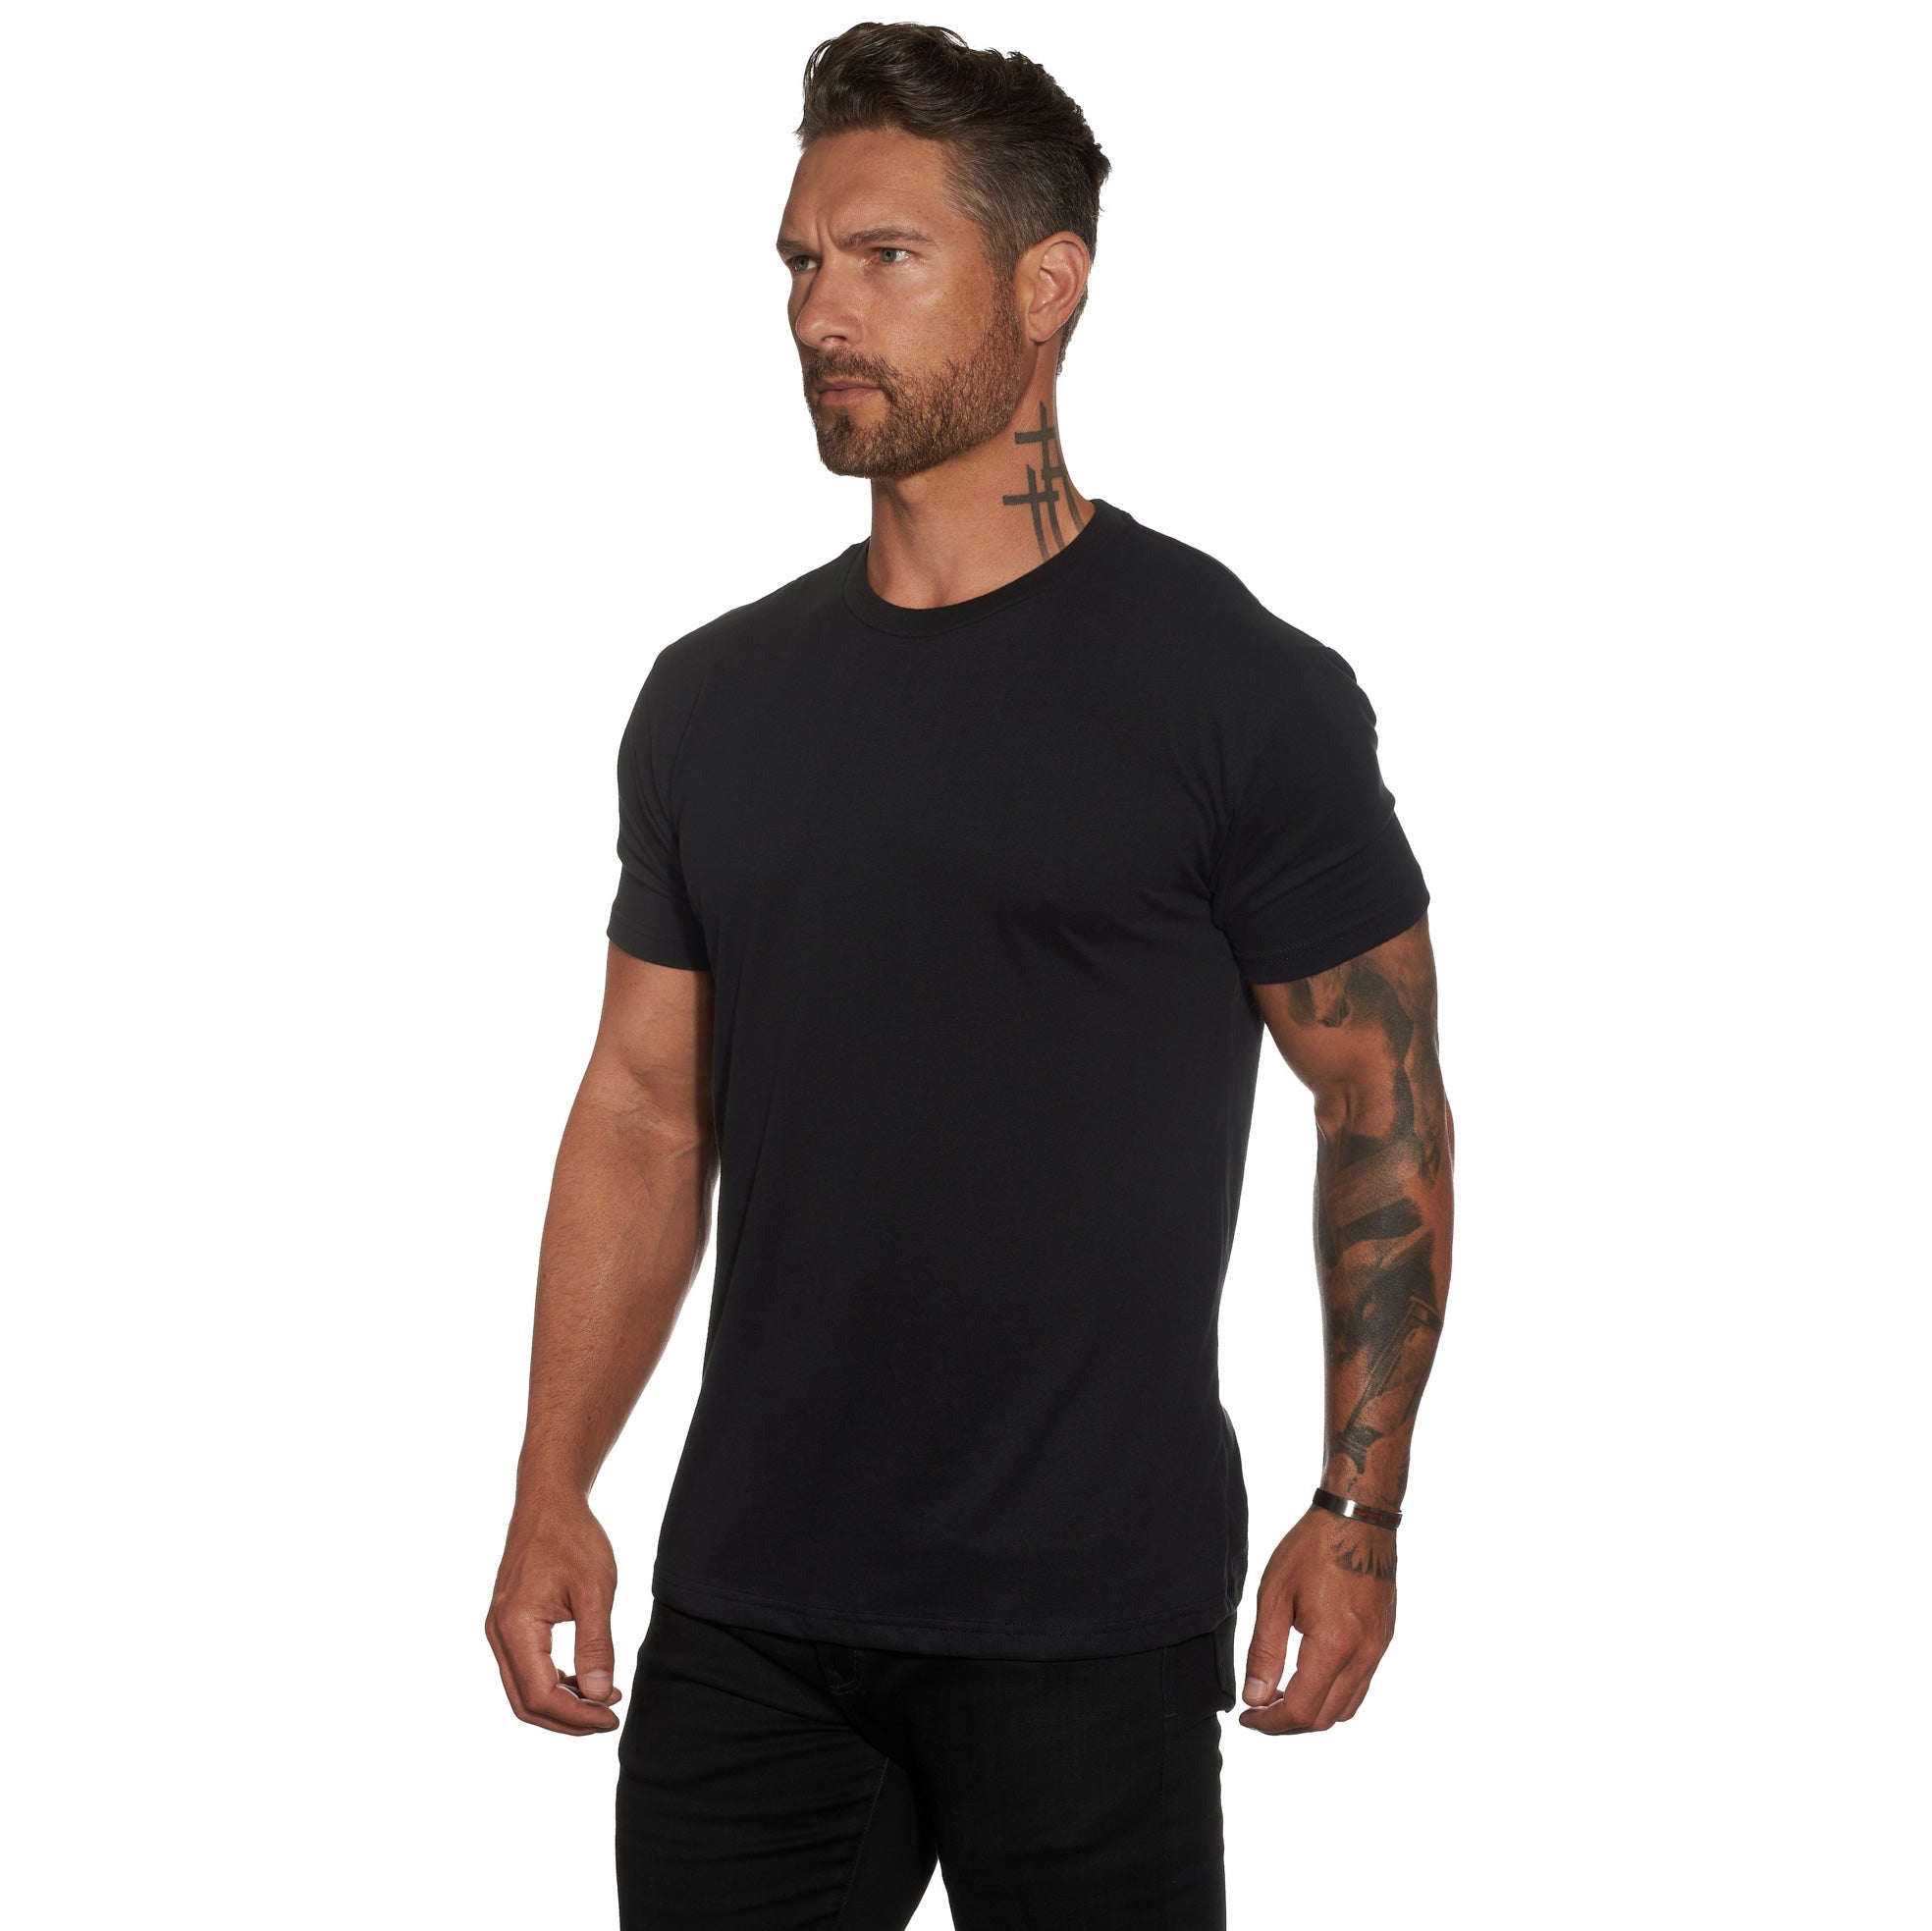 Solid stretch cotton shirt Athletic fit, Le 31